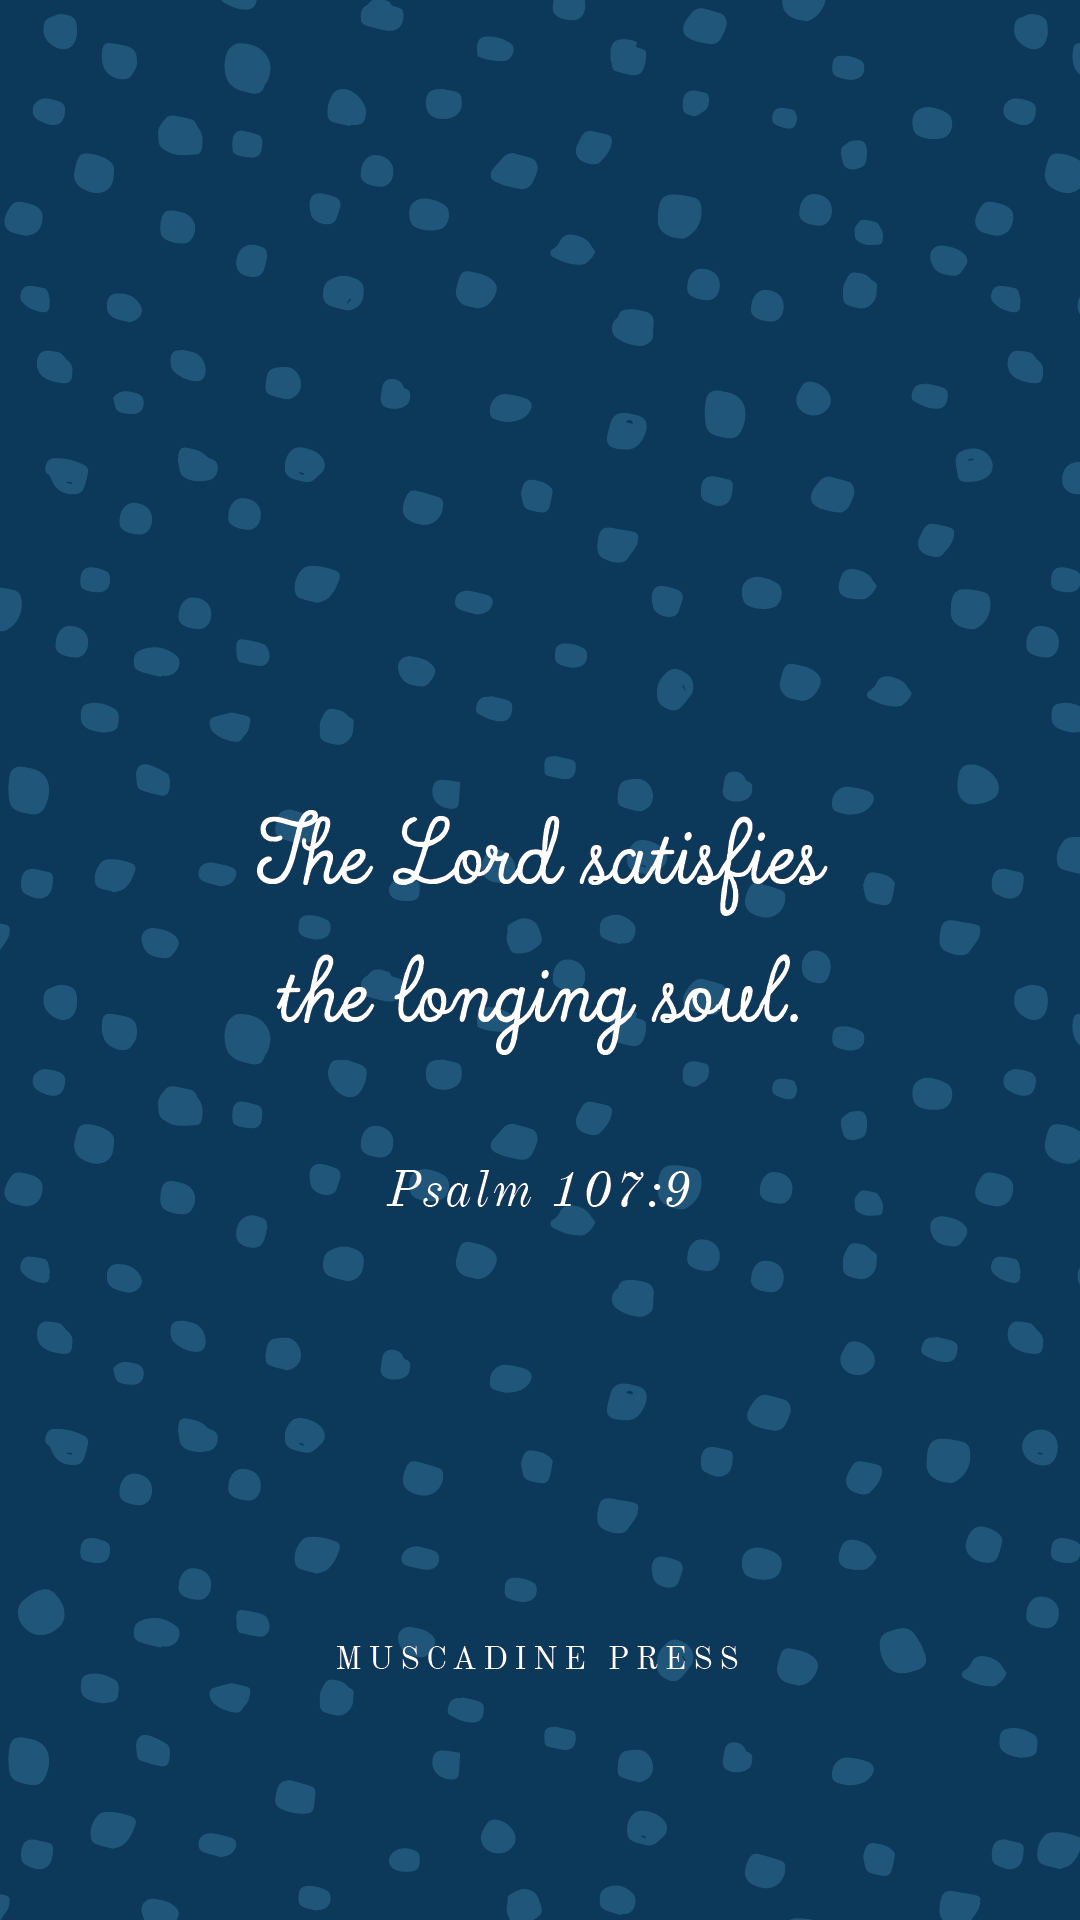 The Lord satisfies the longing soul. Free scripture lock screen from Muscadine Press.